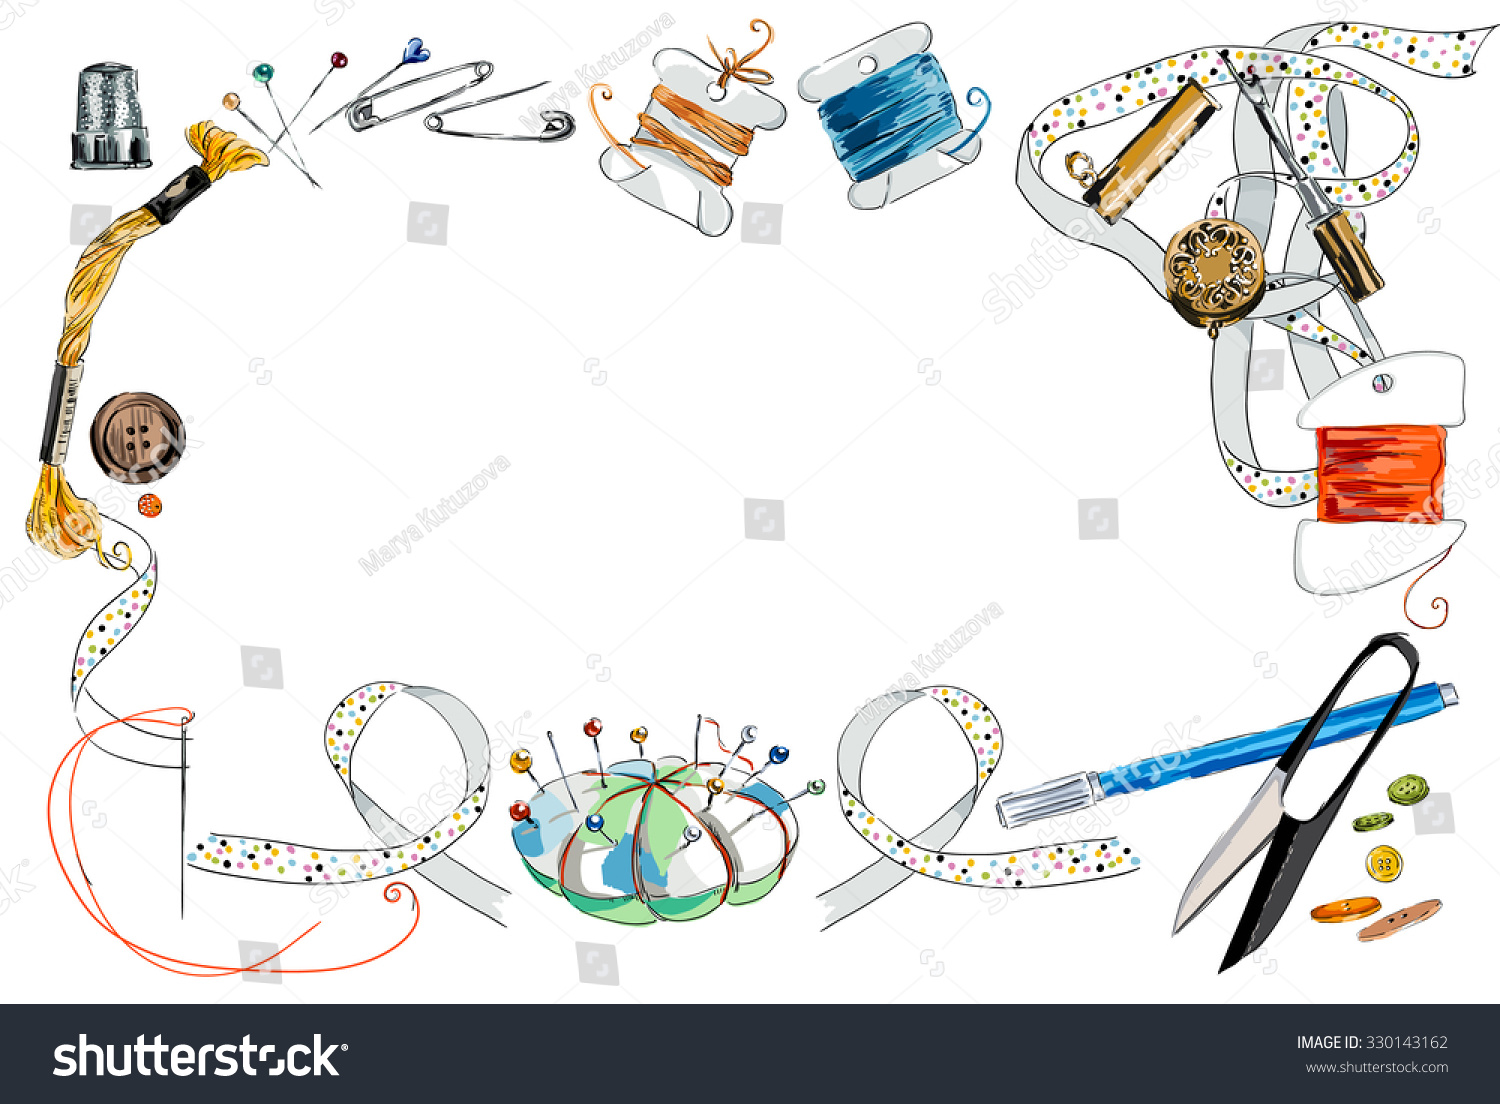 Frame From Sewing Tools And Colored Tape. Sewing Kit. Scissors, Bobbins ...